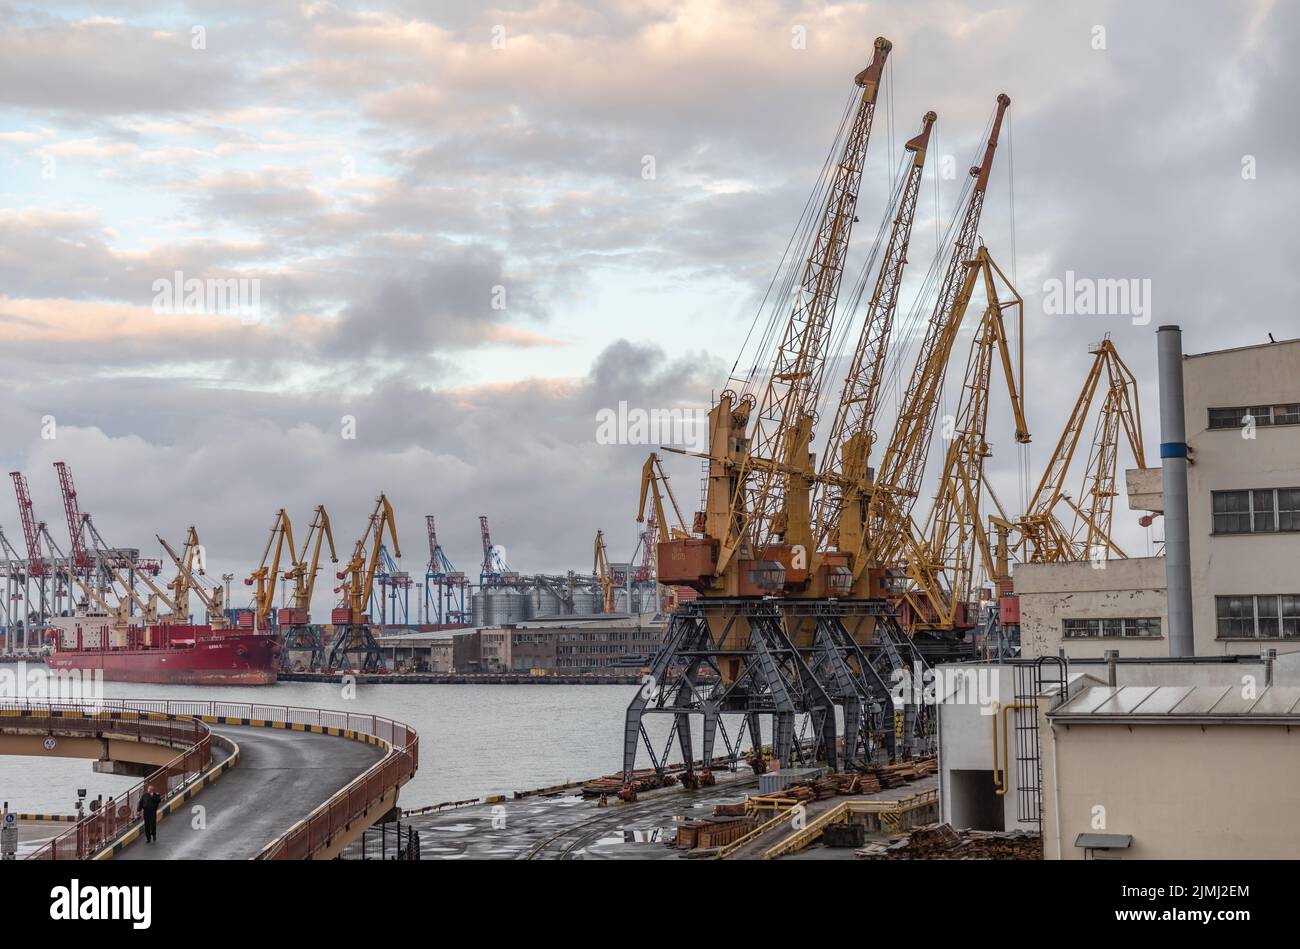 A view of the Industrial zone of Odessa sea port. For the first time since the beginning of the Russian war of aggression against Ukraine, a ship carrying grain has left the port of Odessa. This should make millions of tons of grain available again for the world market. Before the Russian war of aggression, Ukraine was one of the world's most important grain exporters. For them, billions in revenue from the sale of wheat and corn, among other commodities, is at stake. Stock Photo